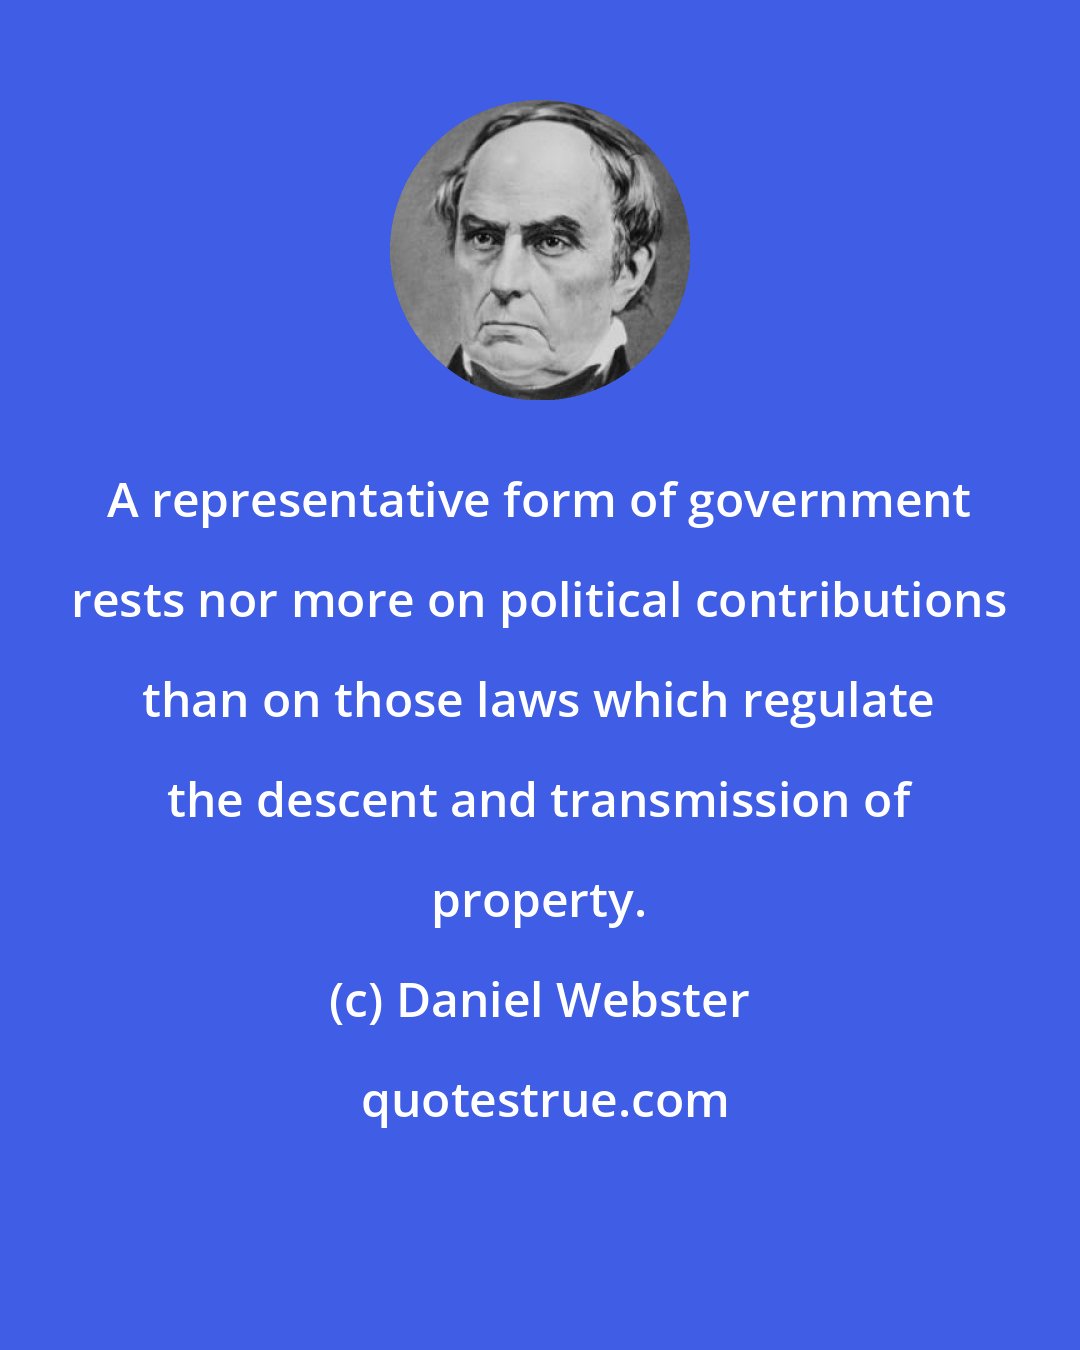 Daniel Webster: A representative form of government rests nor more on political contributions than on those laws which regulate the descent and transmission of property.